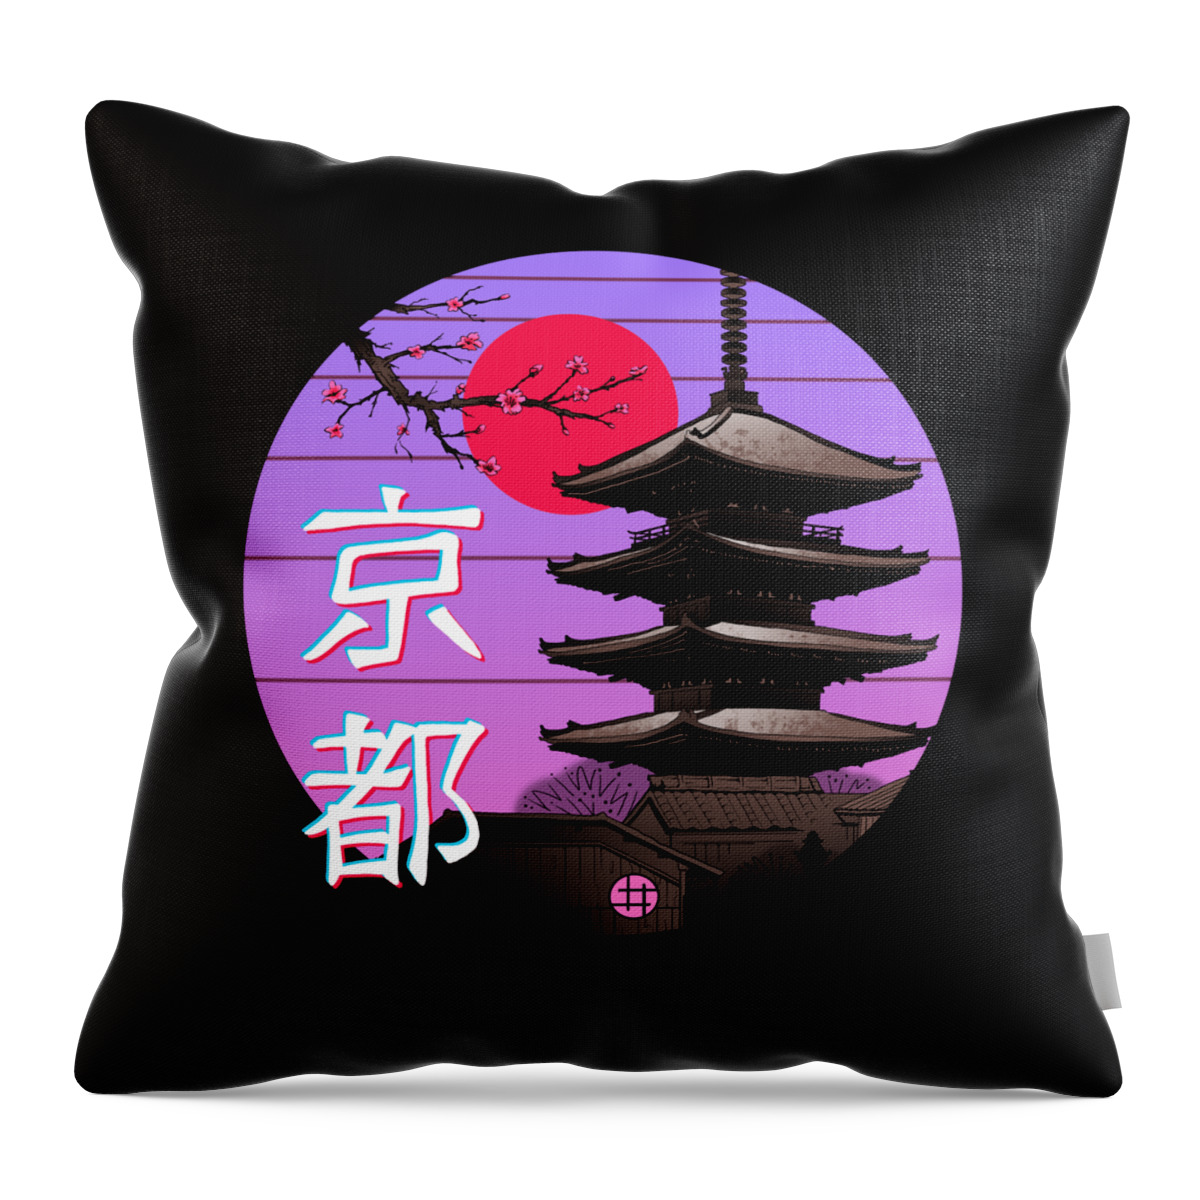 Kyoto Throw Pillow featuring the digital art Kyoto Wave by Vincent Trinidad